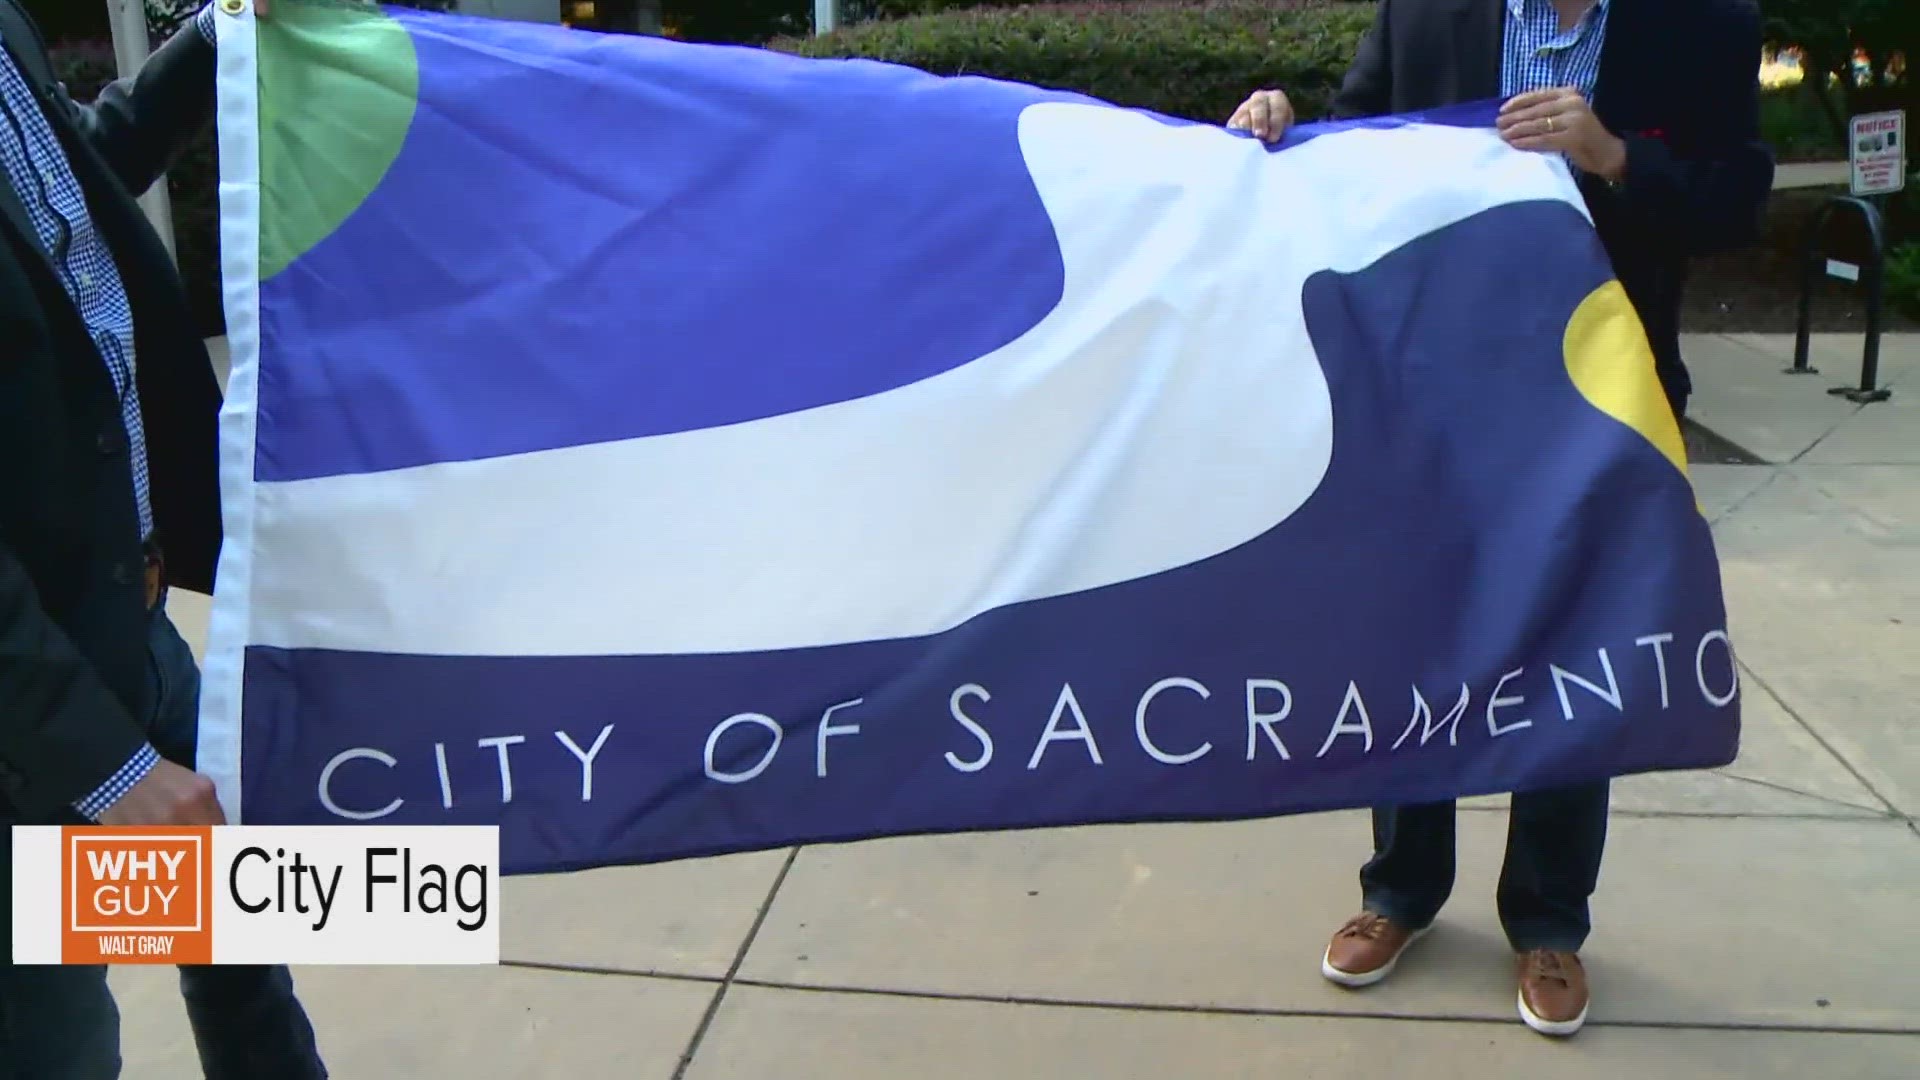 Truth be told, Sacramento does have an official flag and it’s been the same one since 1989.